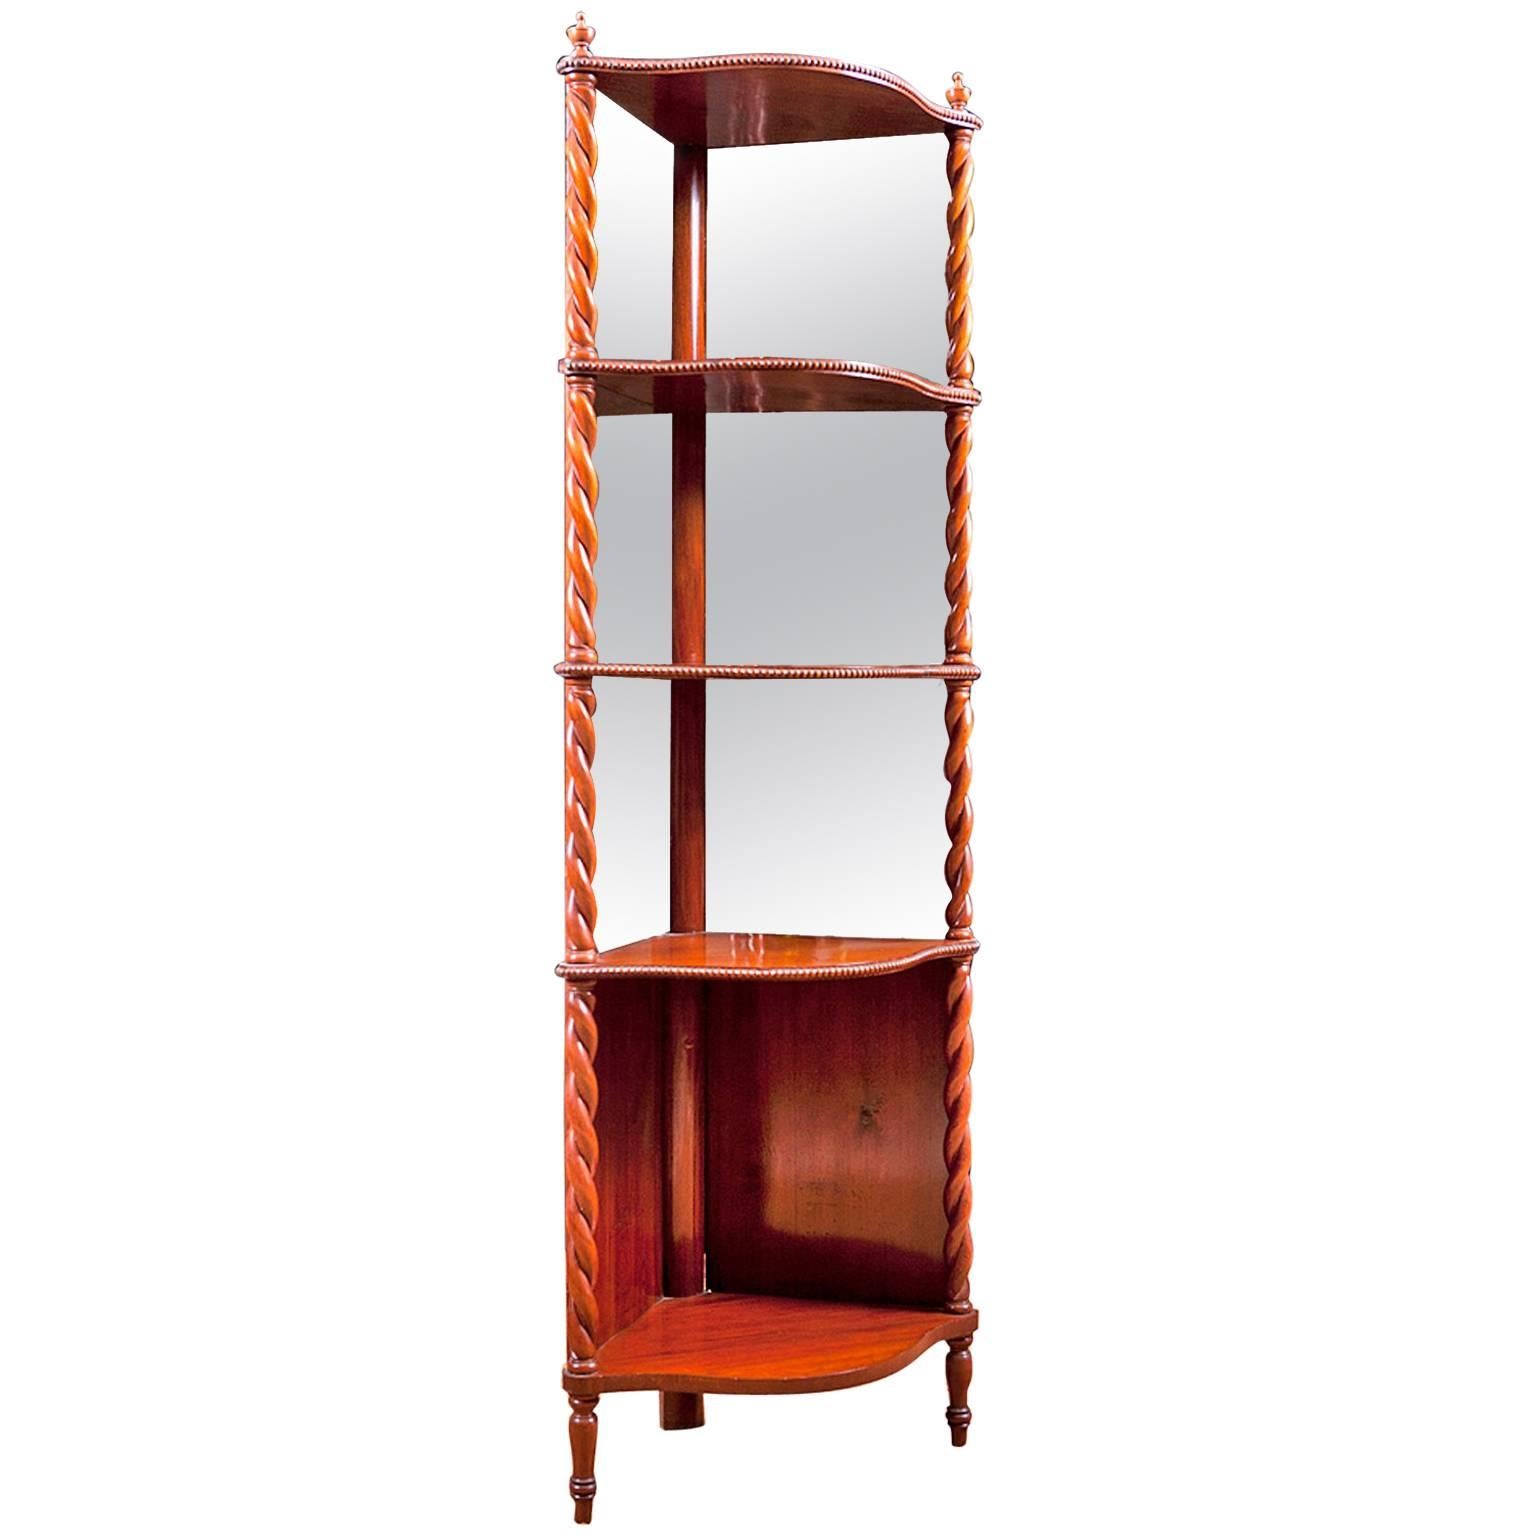 Corner Étagère in Mahogany with Mirrored Back Panels, Denmark, circa 1835